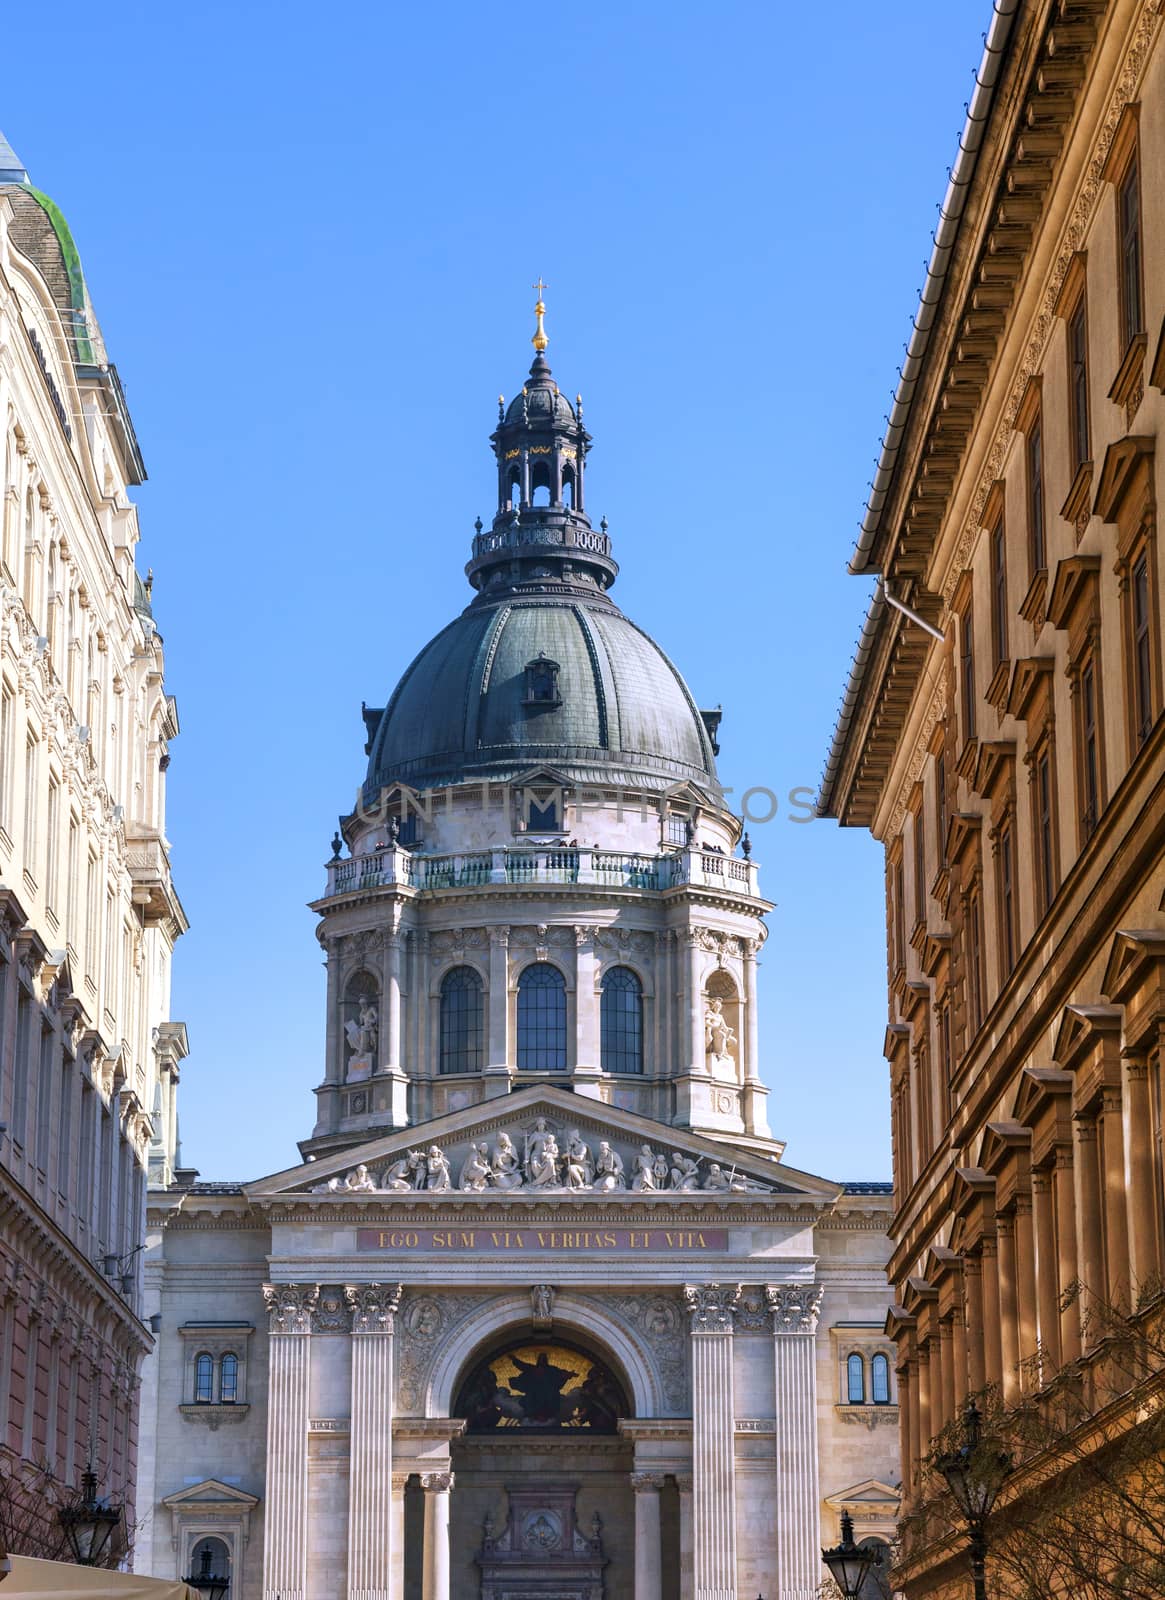 Dome of St. Stephen's Basilica in Budapest by Goodday